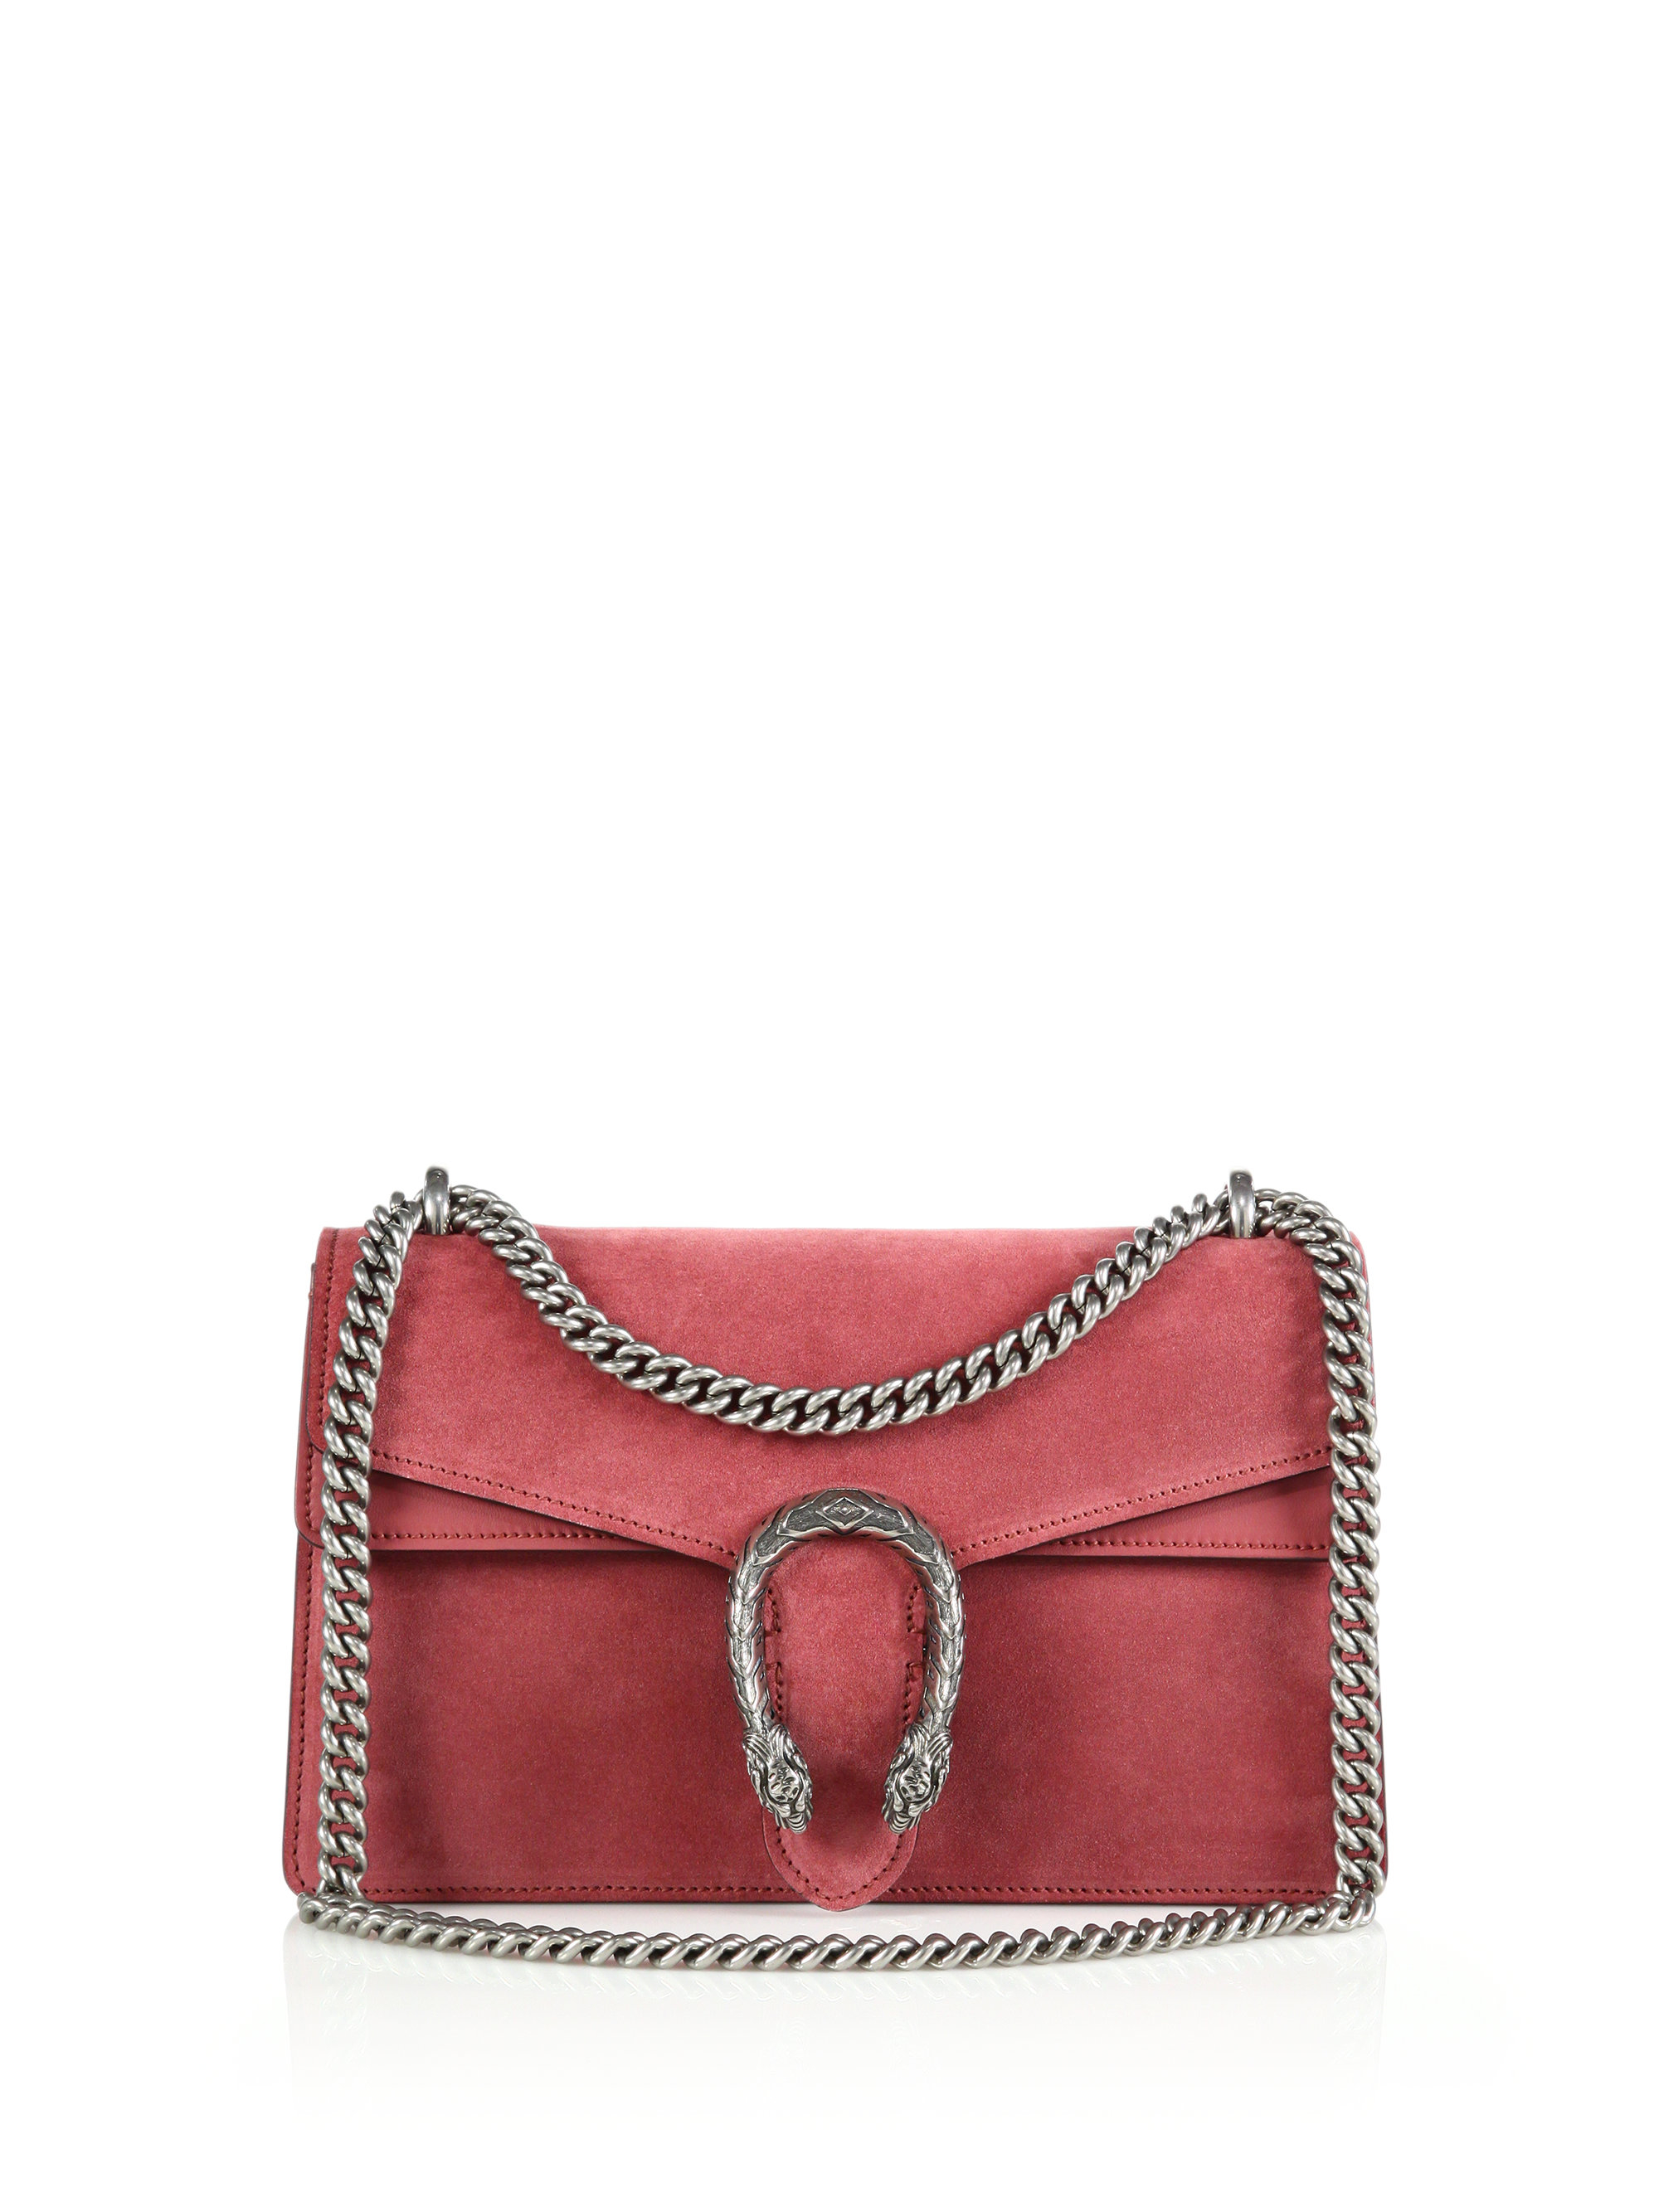 Gucci Dionysus Small Suede Shoulder Bag in Pink (rose) | Lyst